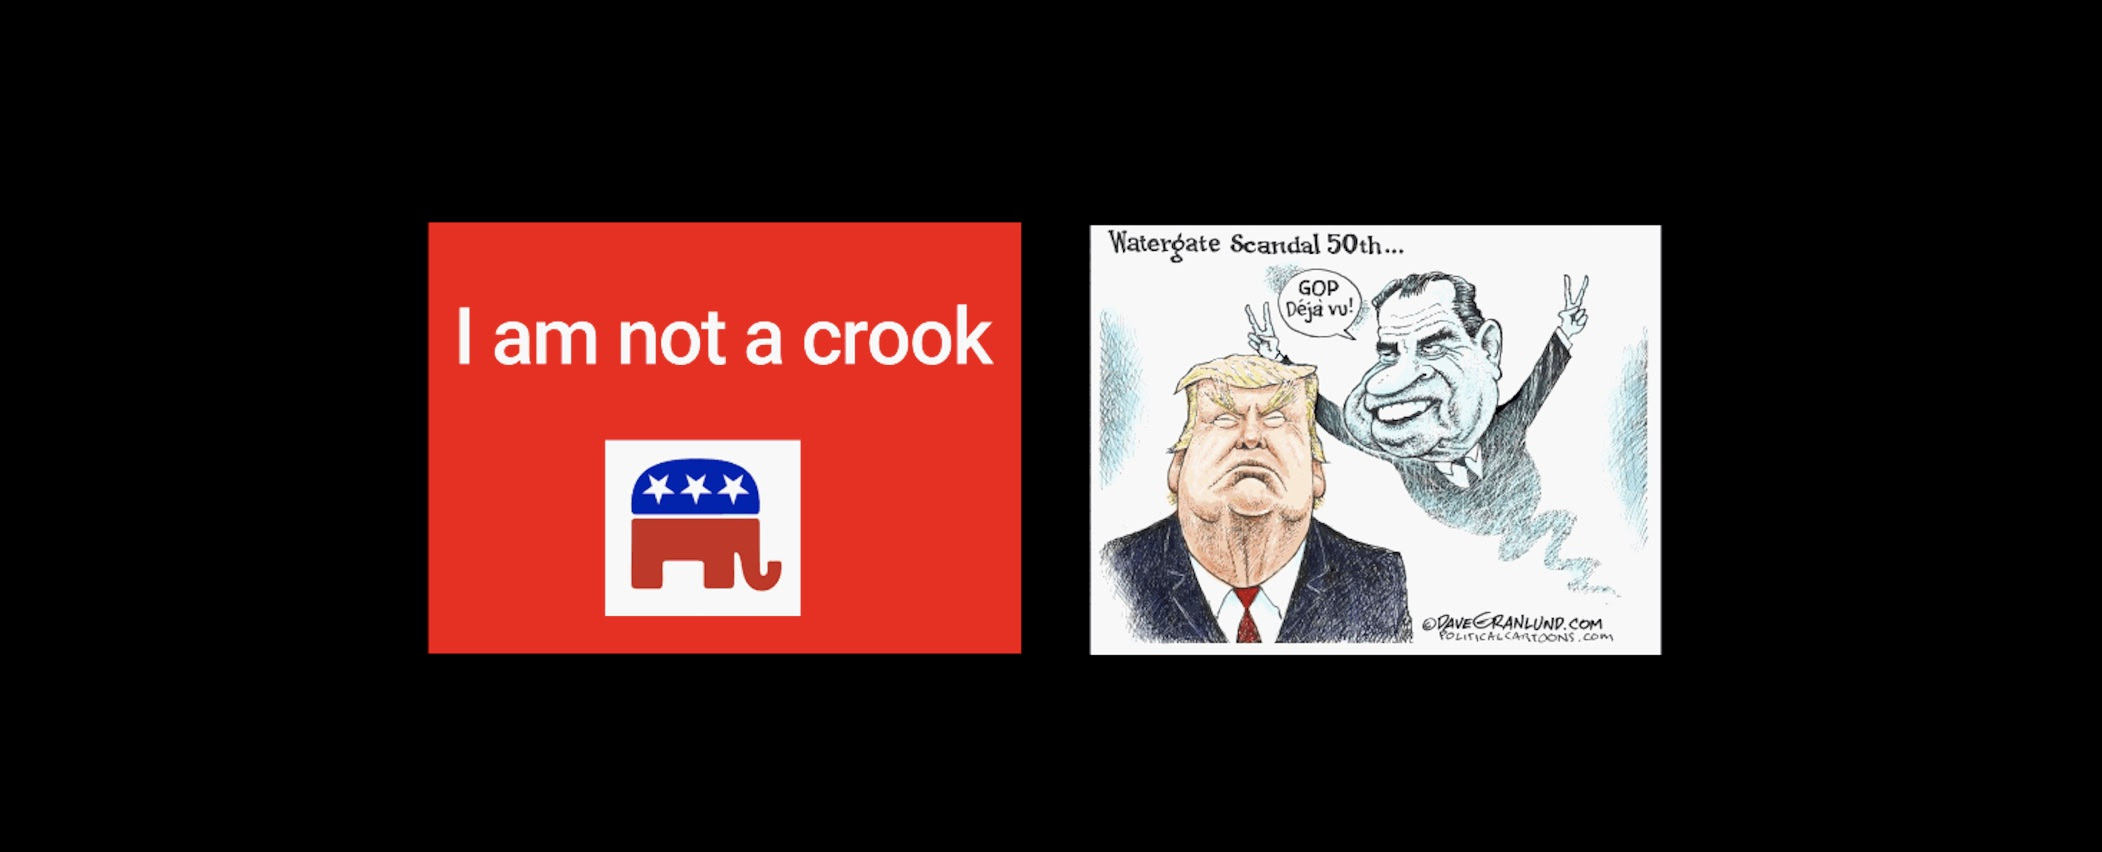 I am not a crook. Republicans claim to be above the law.